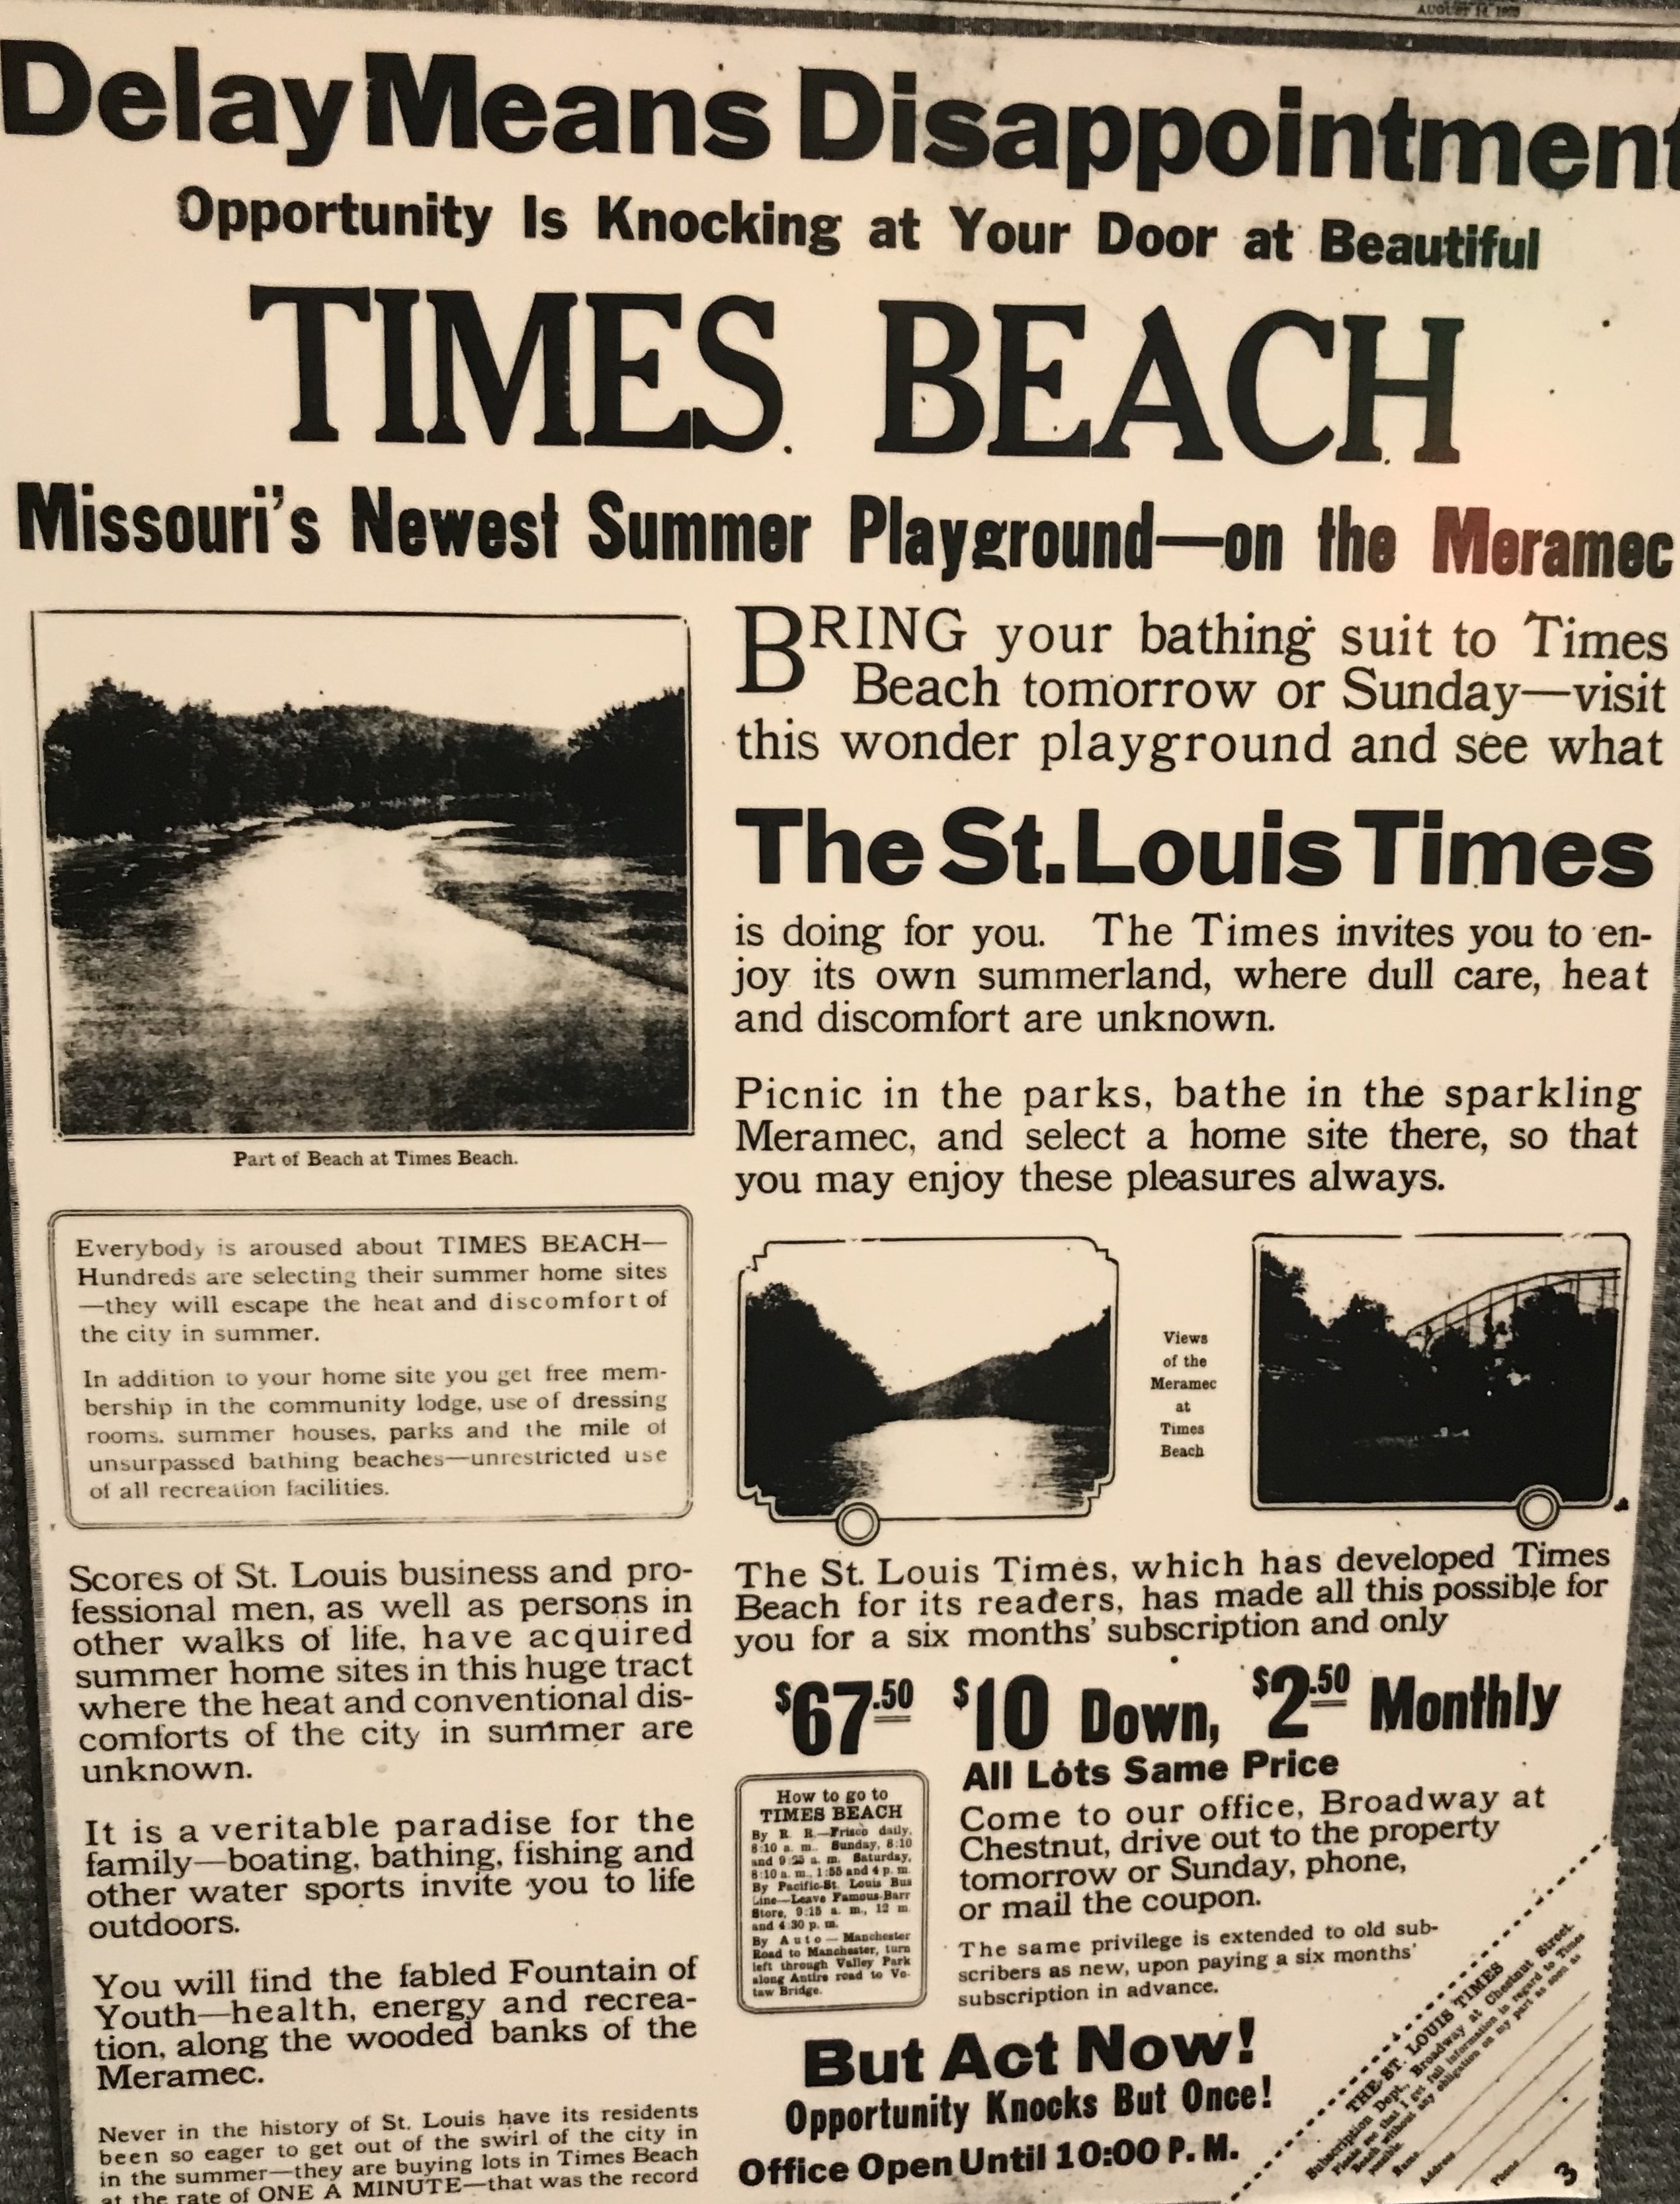  Times Beach - first a resort, then a town, now disappeared - started out  as a newspaper circulation promotion. The visitor center at Route 66  State Park includes a small display on Times Beach, which brochures call  "an environmental success story